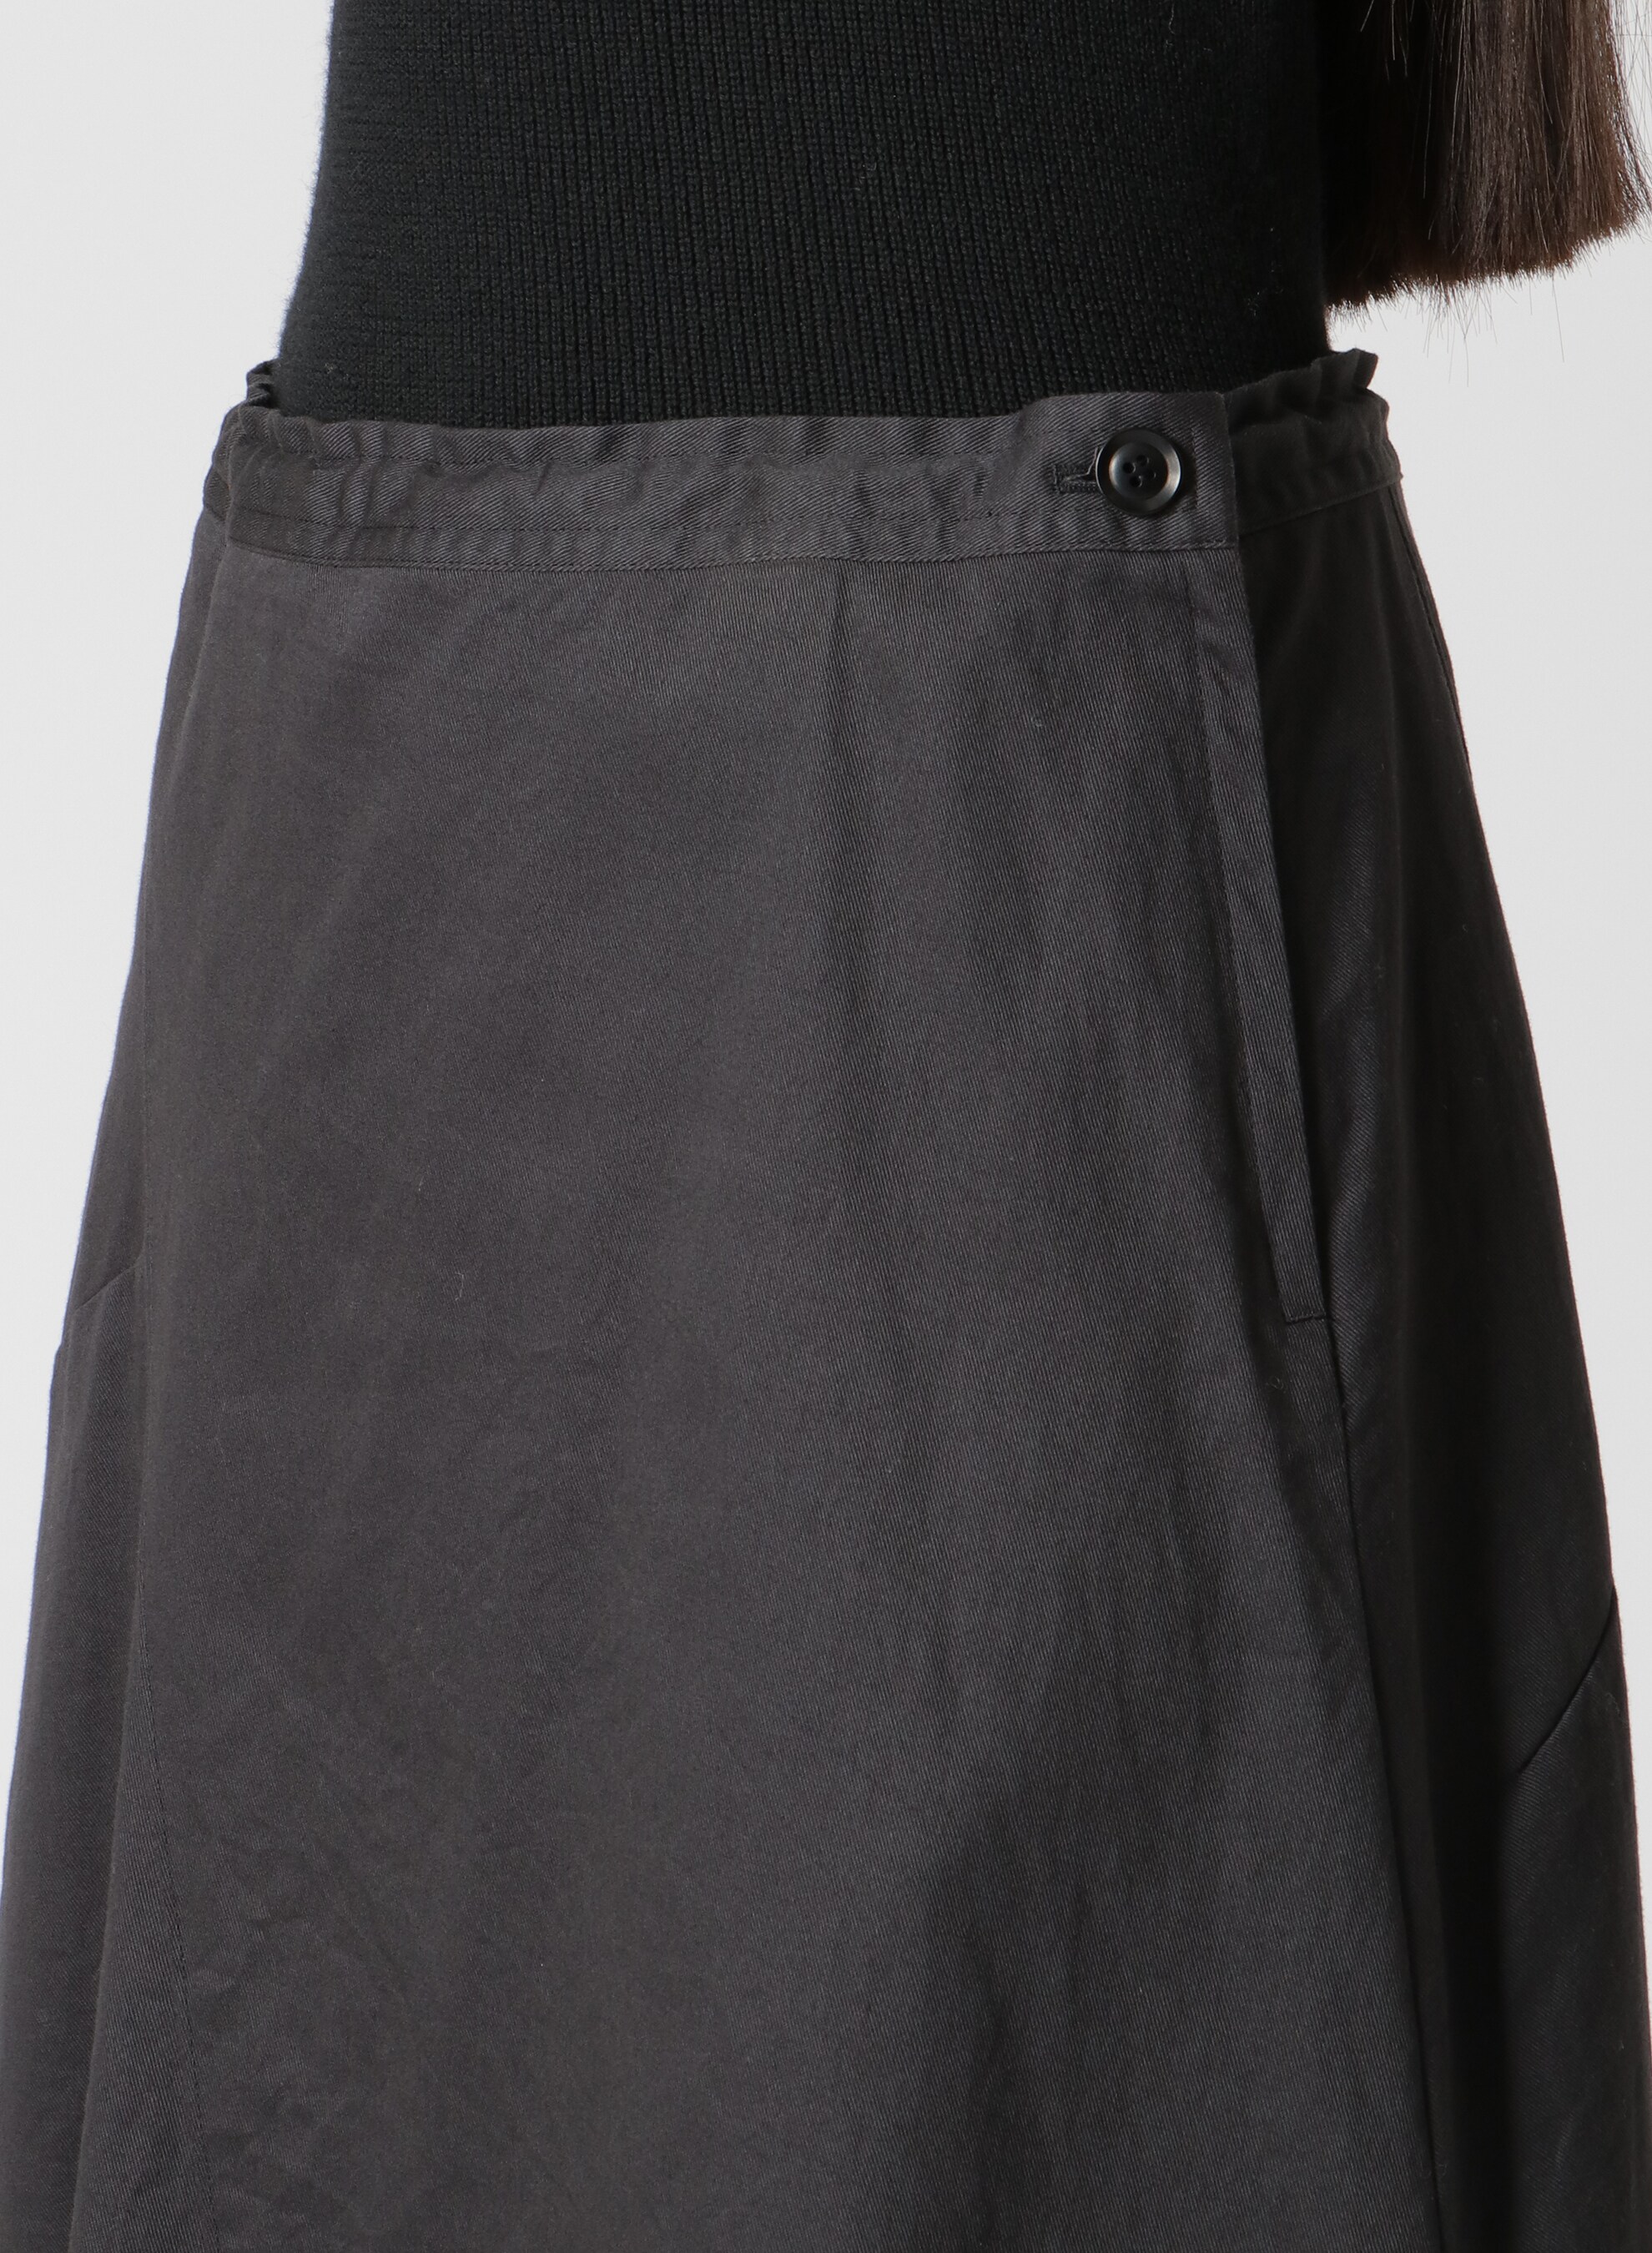 [Y's BORN PRODUCT]COTTON TWILL DART FLARE SKIRT